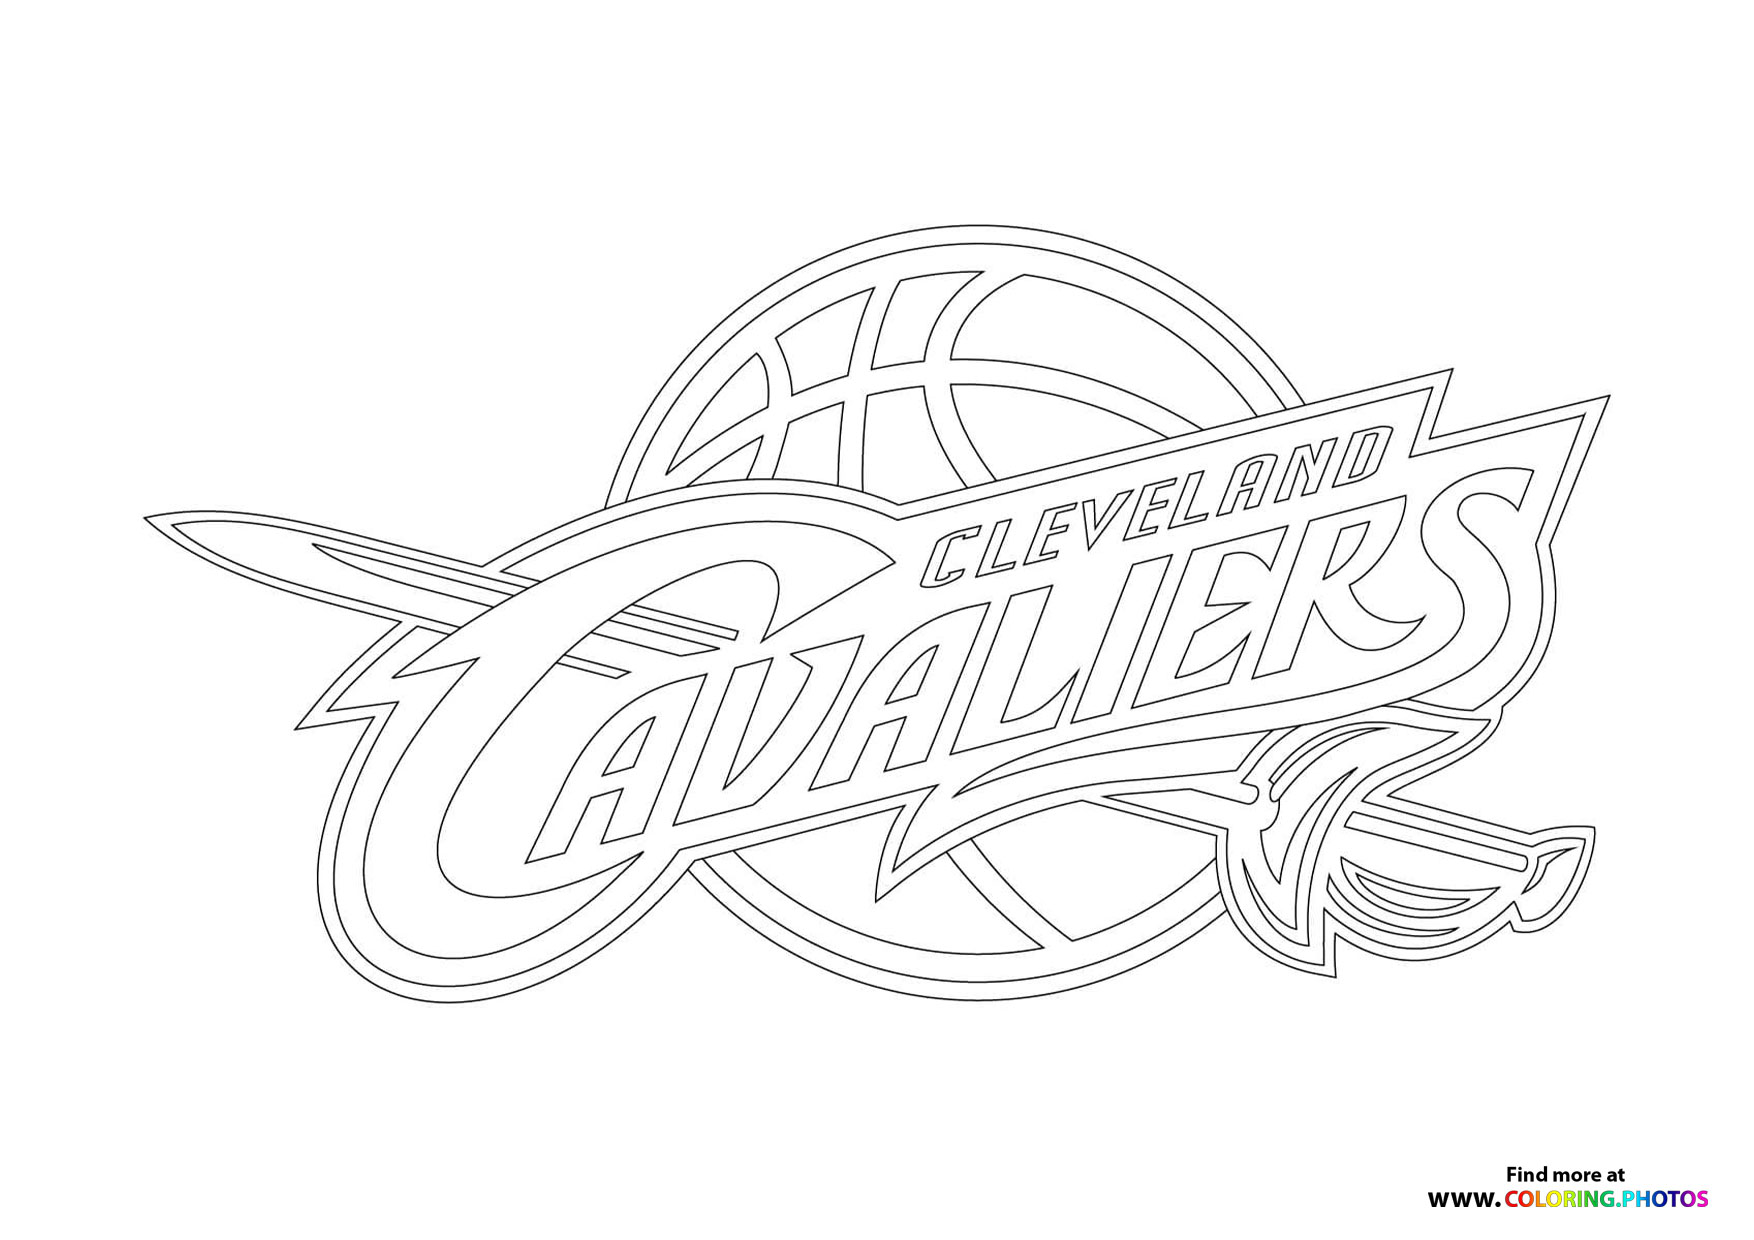 Team logos - Coloring Pages for kids | 100% free print or donwnload